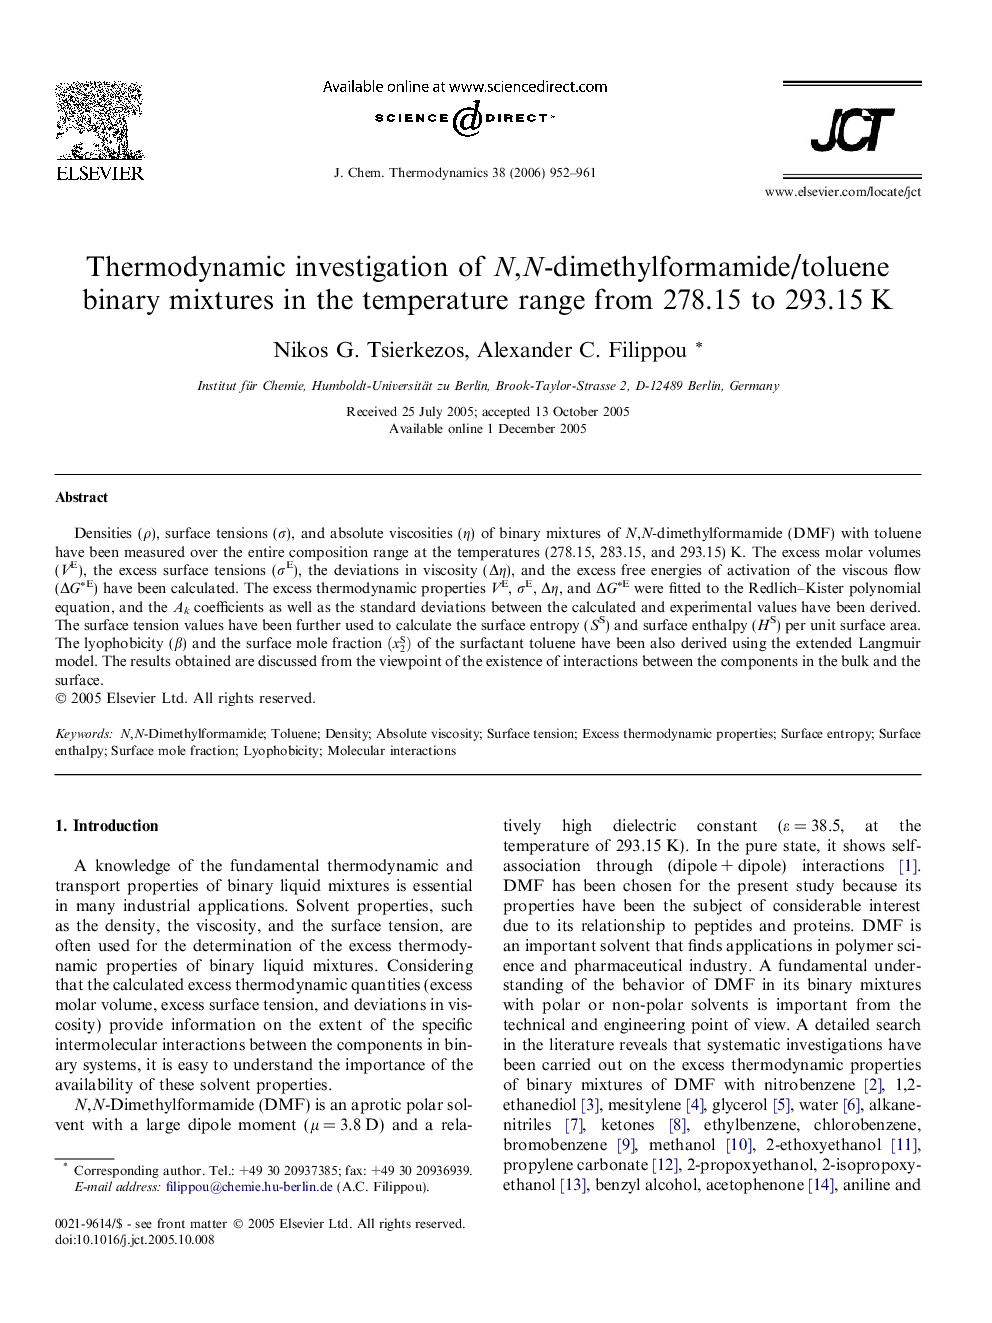 Thermodynamic investigation of N,N-dimethylformamide/toluene binary mixtures in the temperature range from 278.15 to 293.15 K